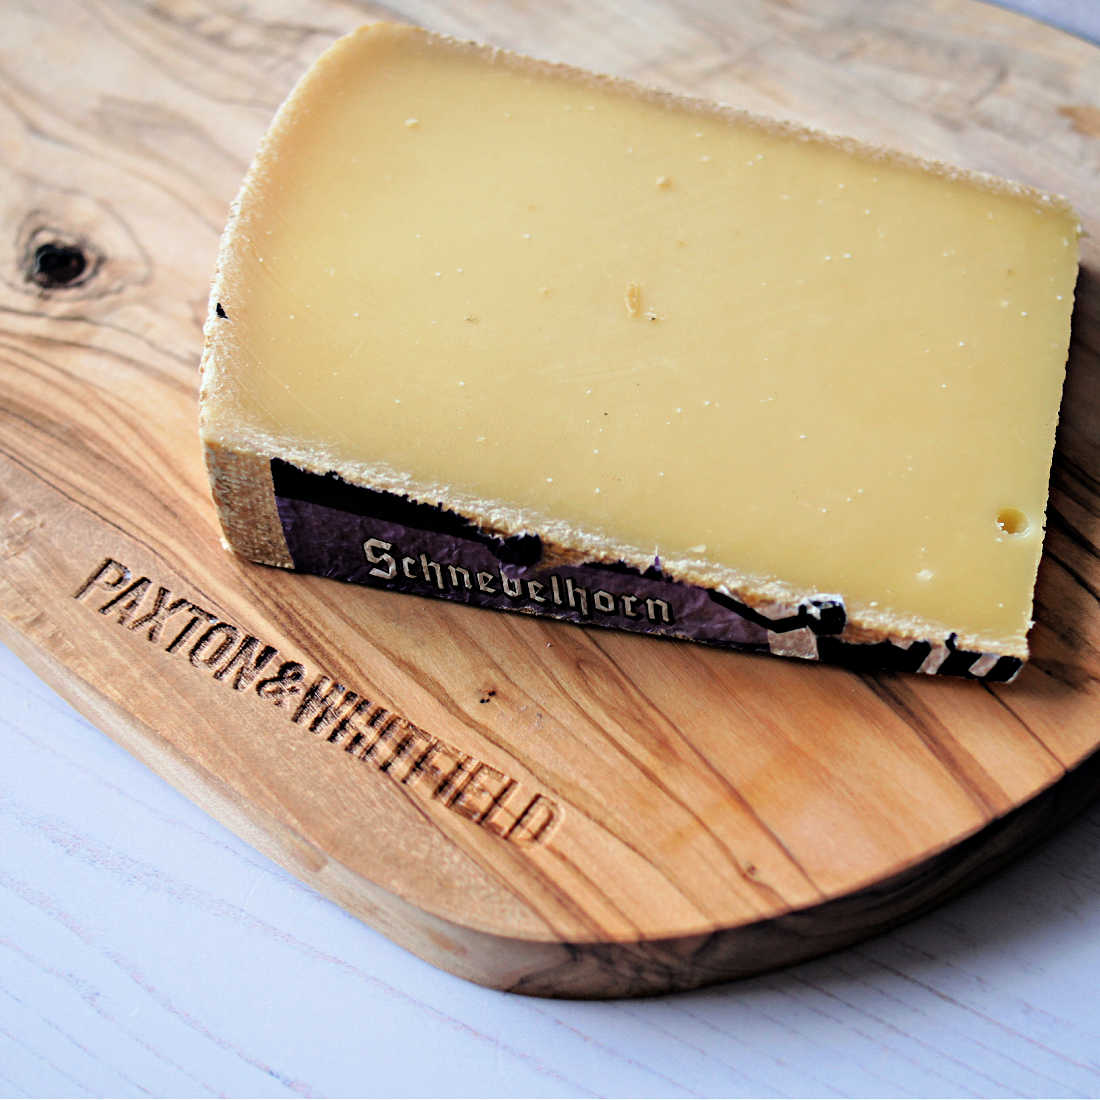 Schneblehorn-cut-cheese-low-res